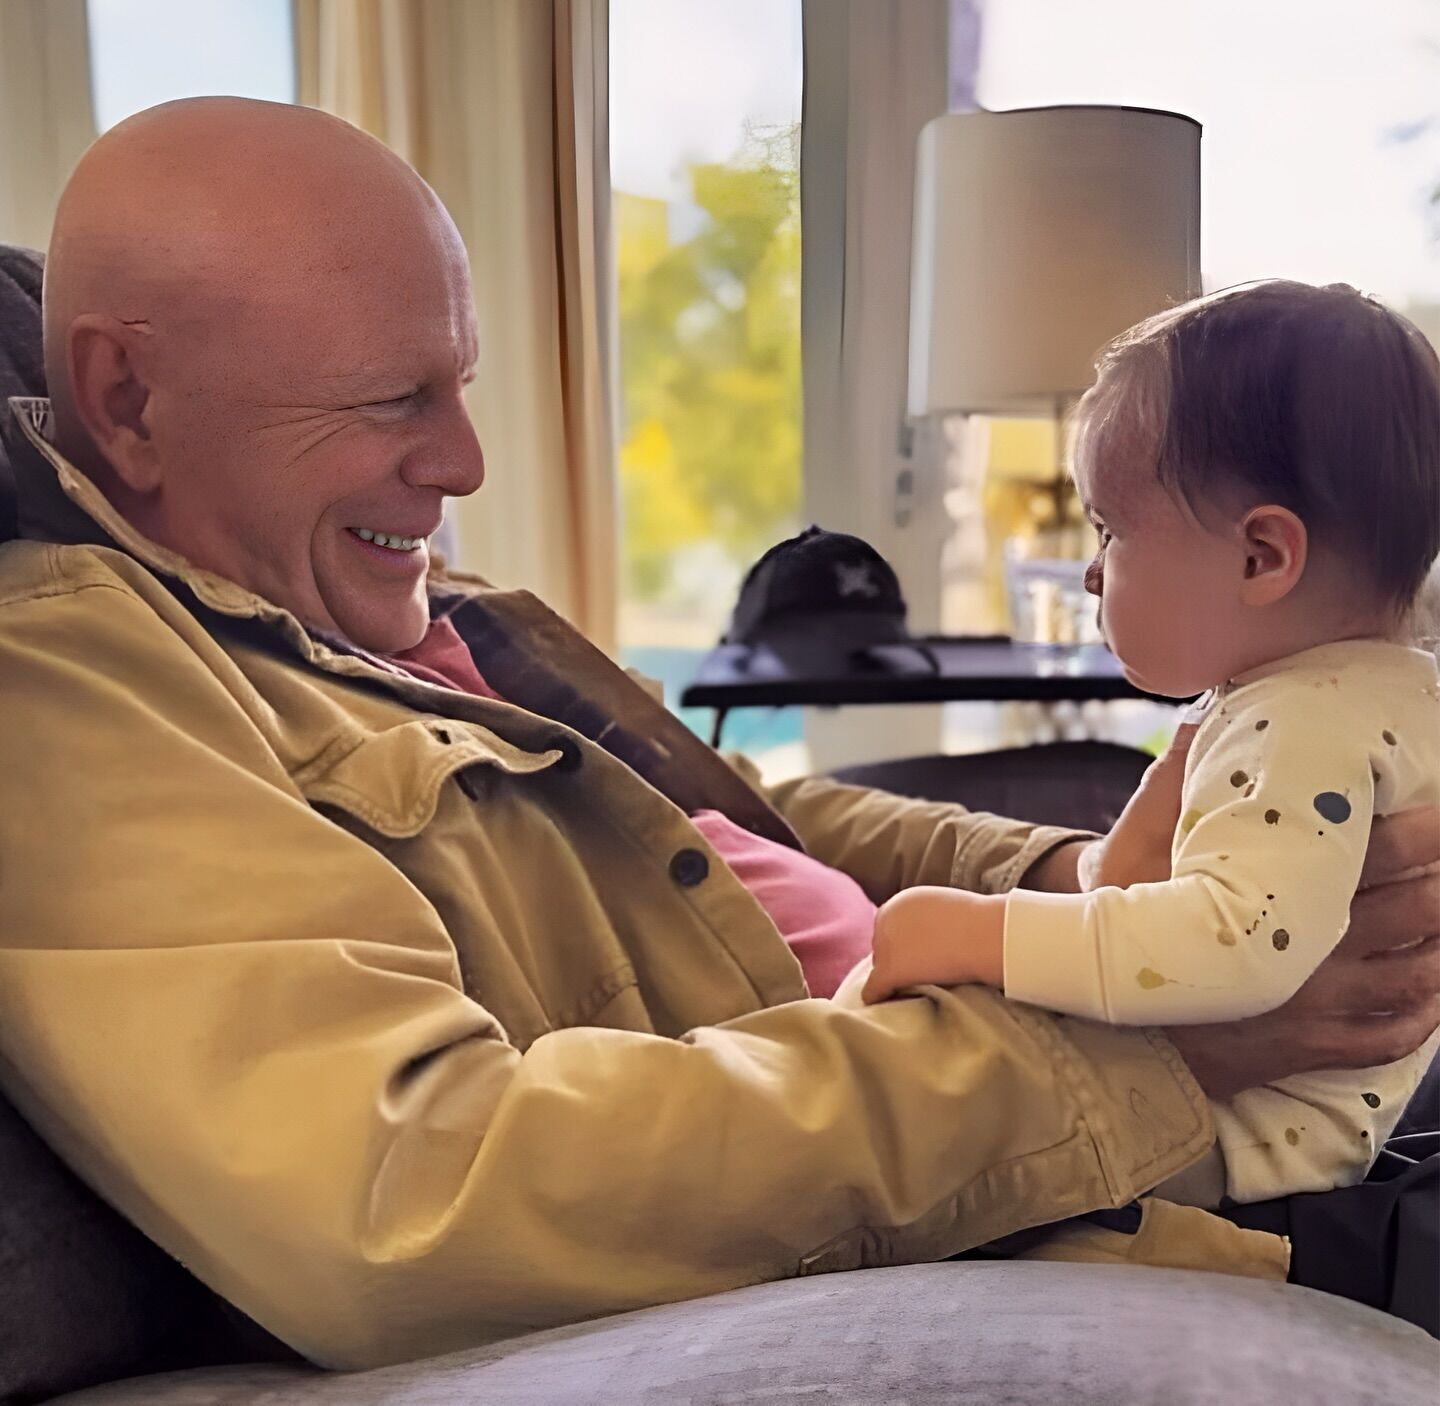 ''Pure joy on his face''. Seriously ill Bruce Willis showed a photo with his only granddaughter and delighted the network